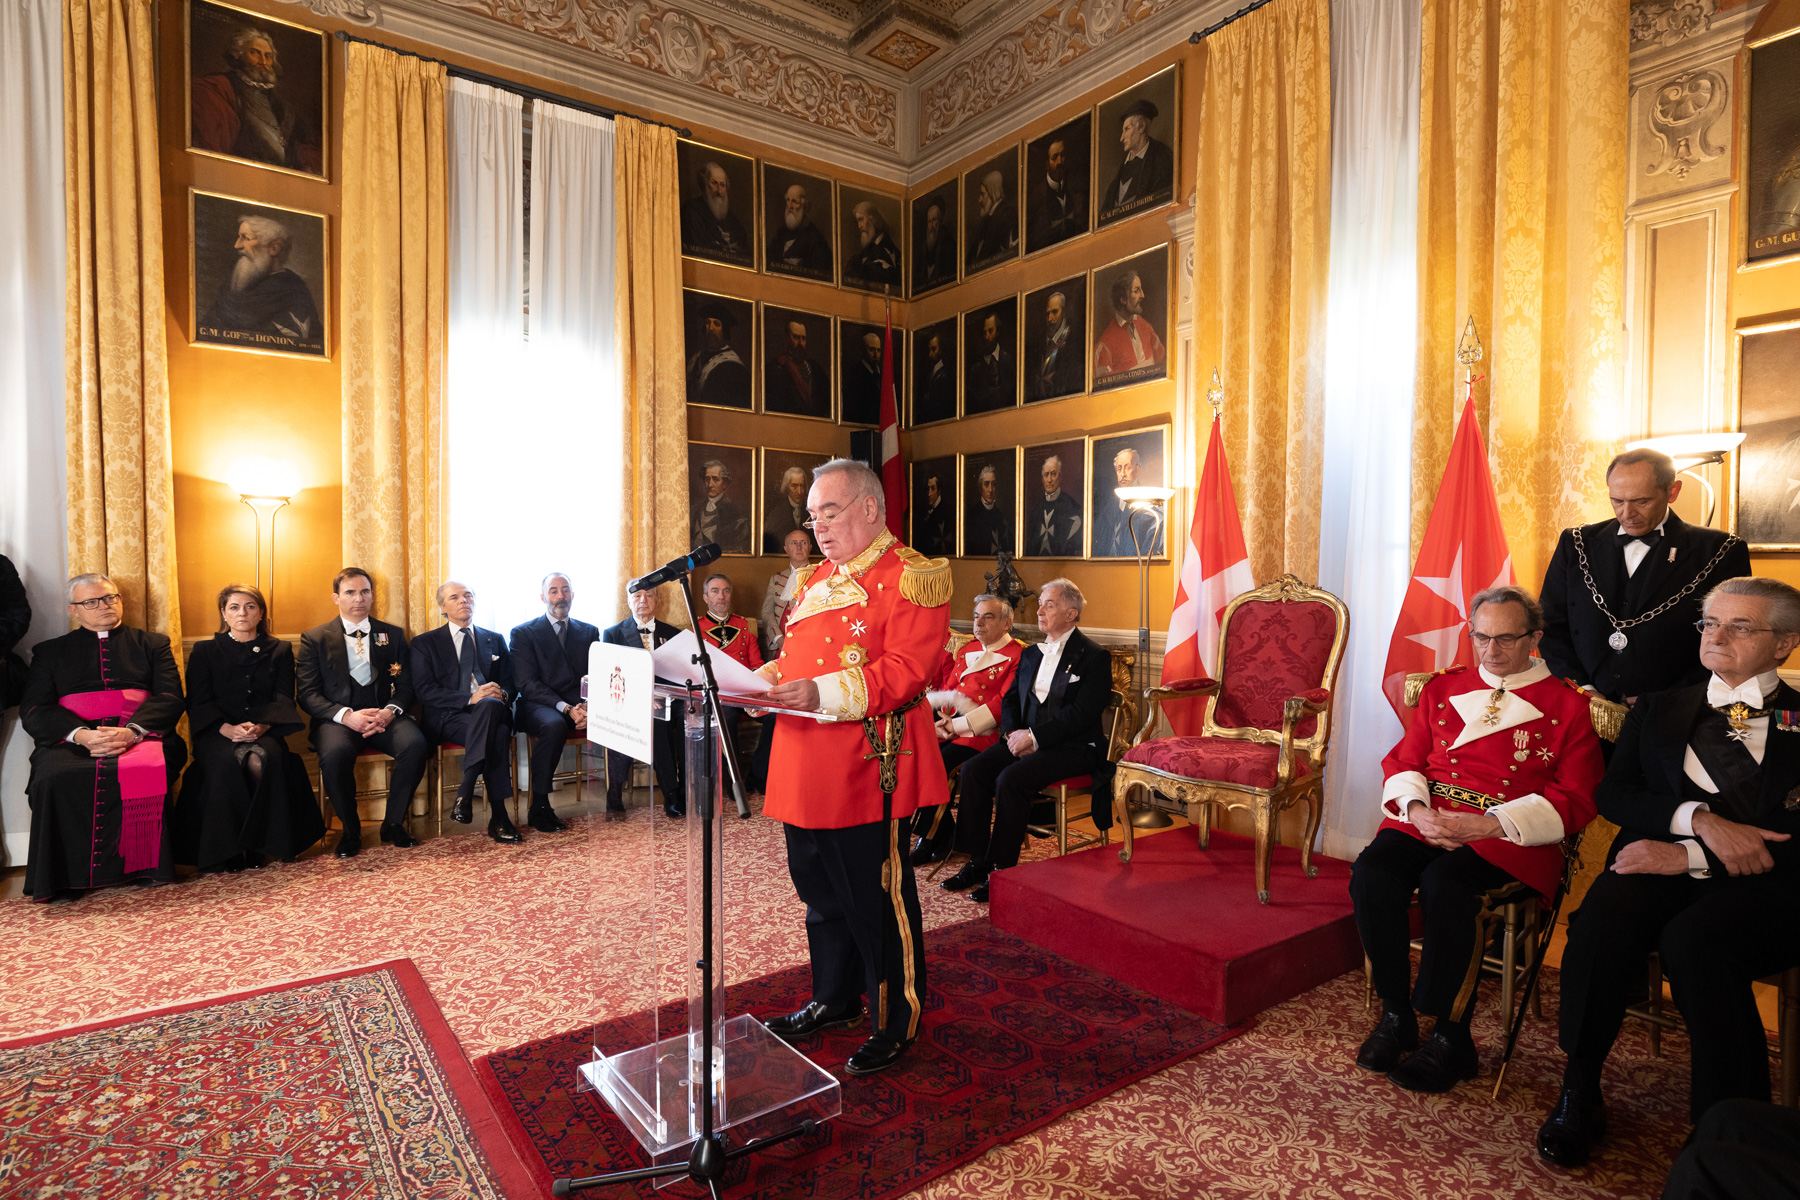 Speech of the Lieutenant of the Grand Master Fra’ John T. Dunlap to the Diplomatic Corps accredited to the Sovereign Order of Malta